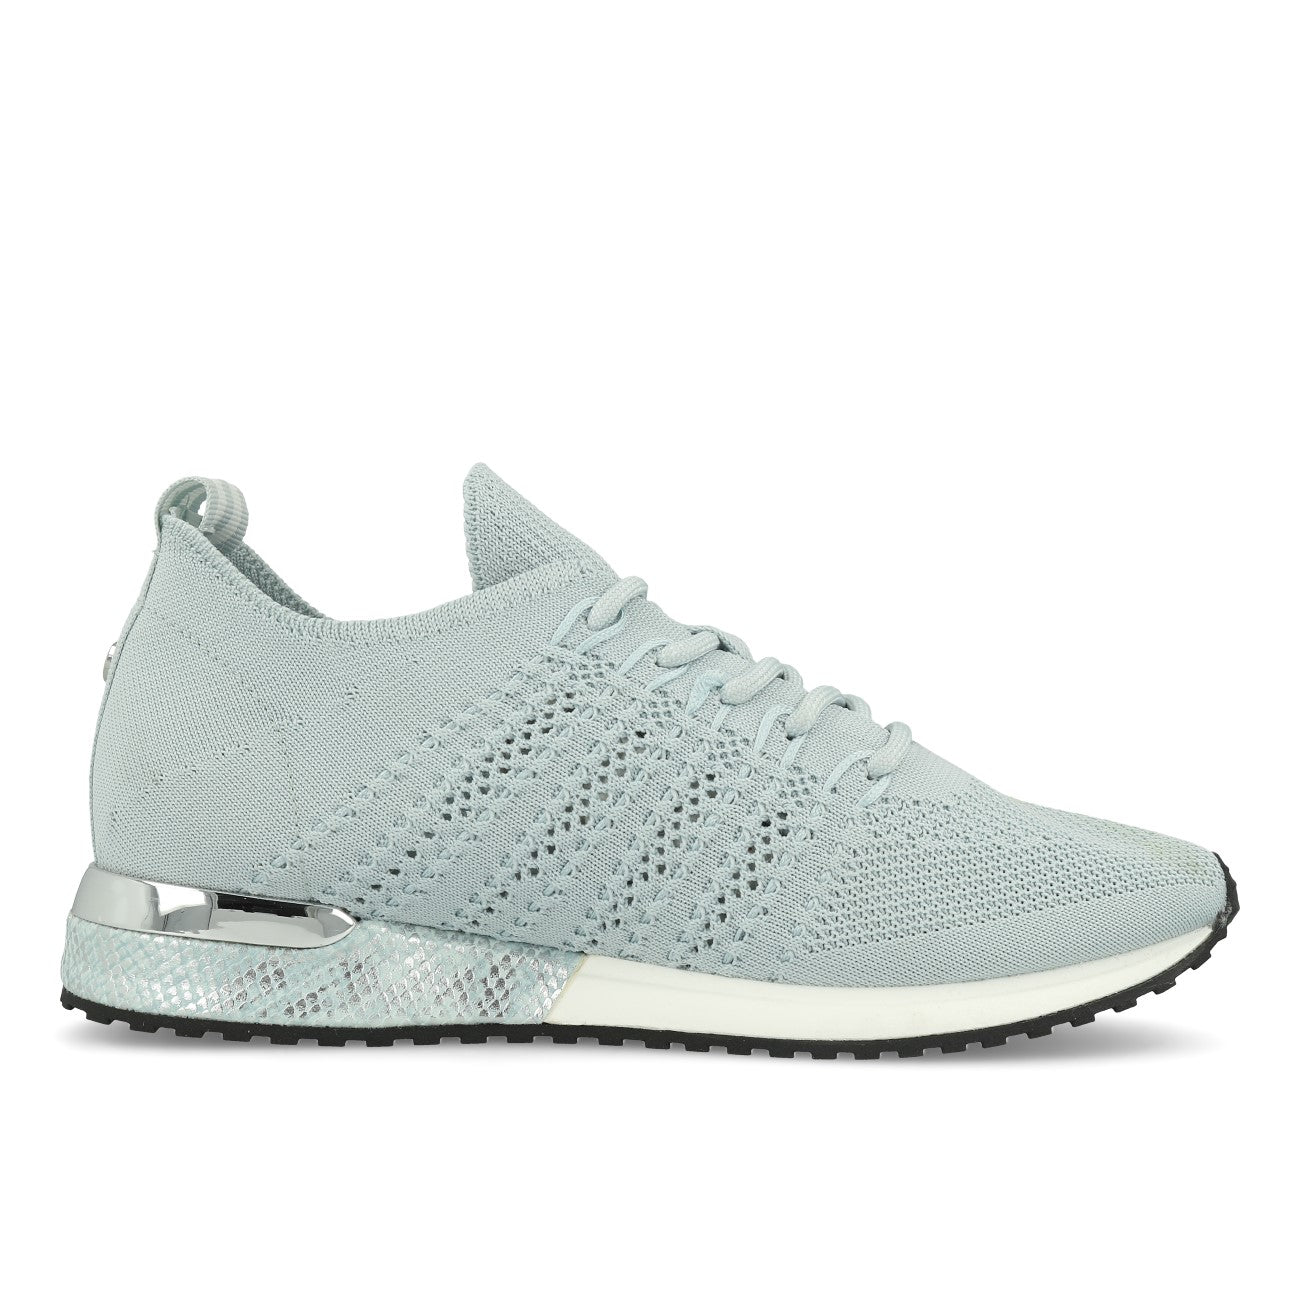 La Strada 1802649 Laced Up Knitted Sneaker Damen Blue Pastel Knitted